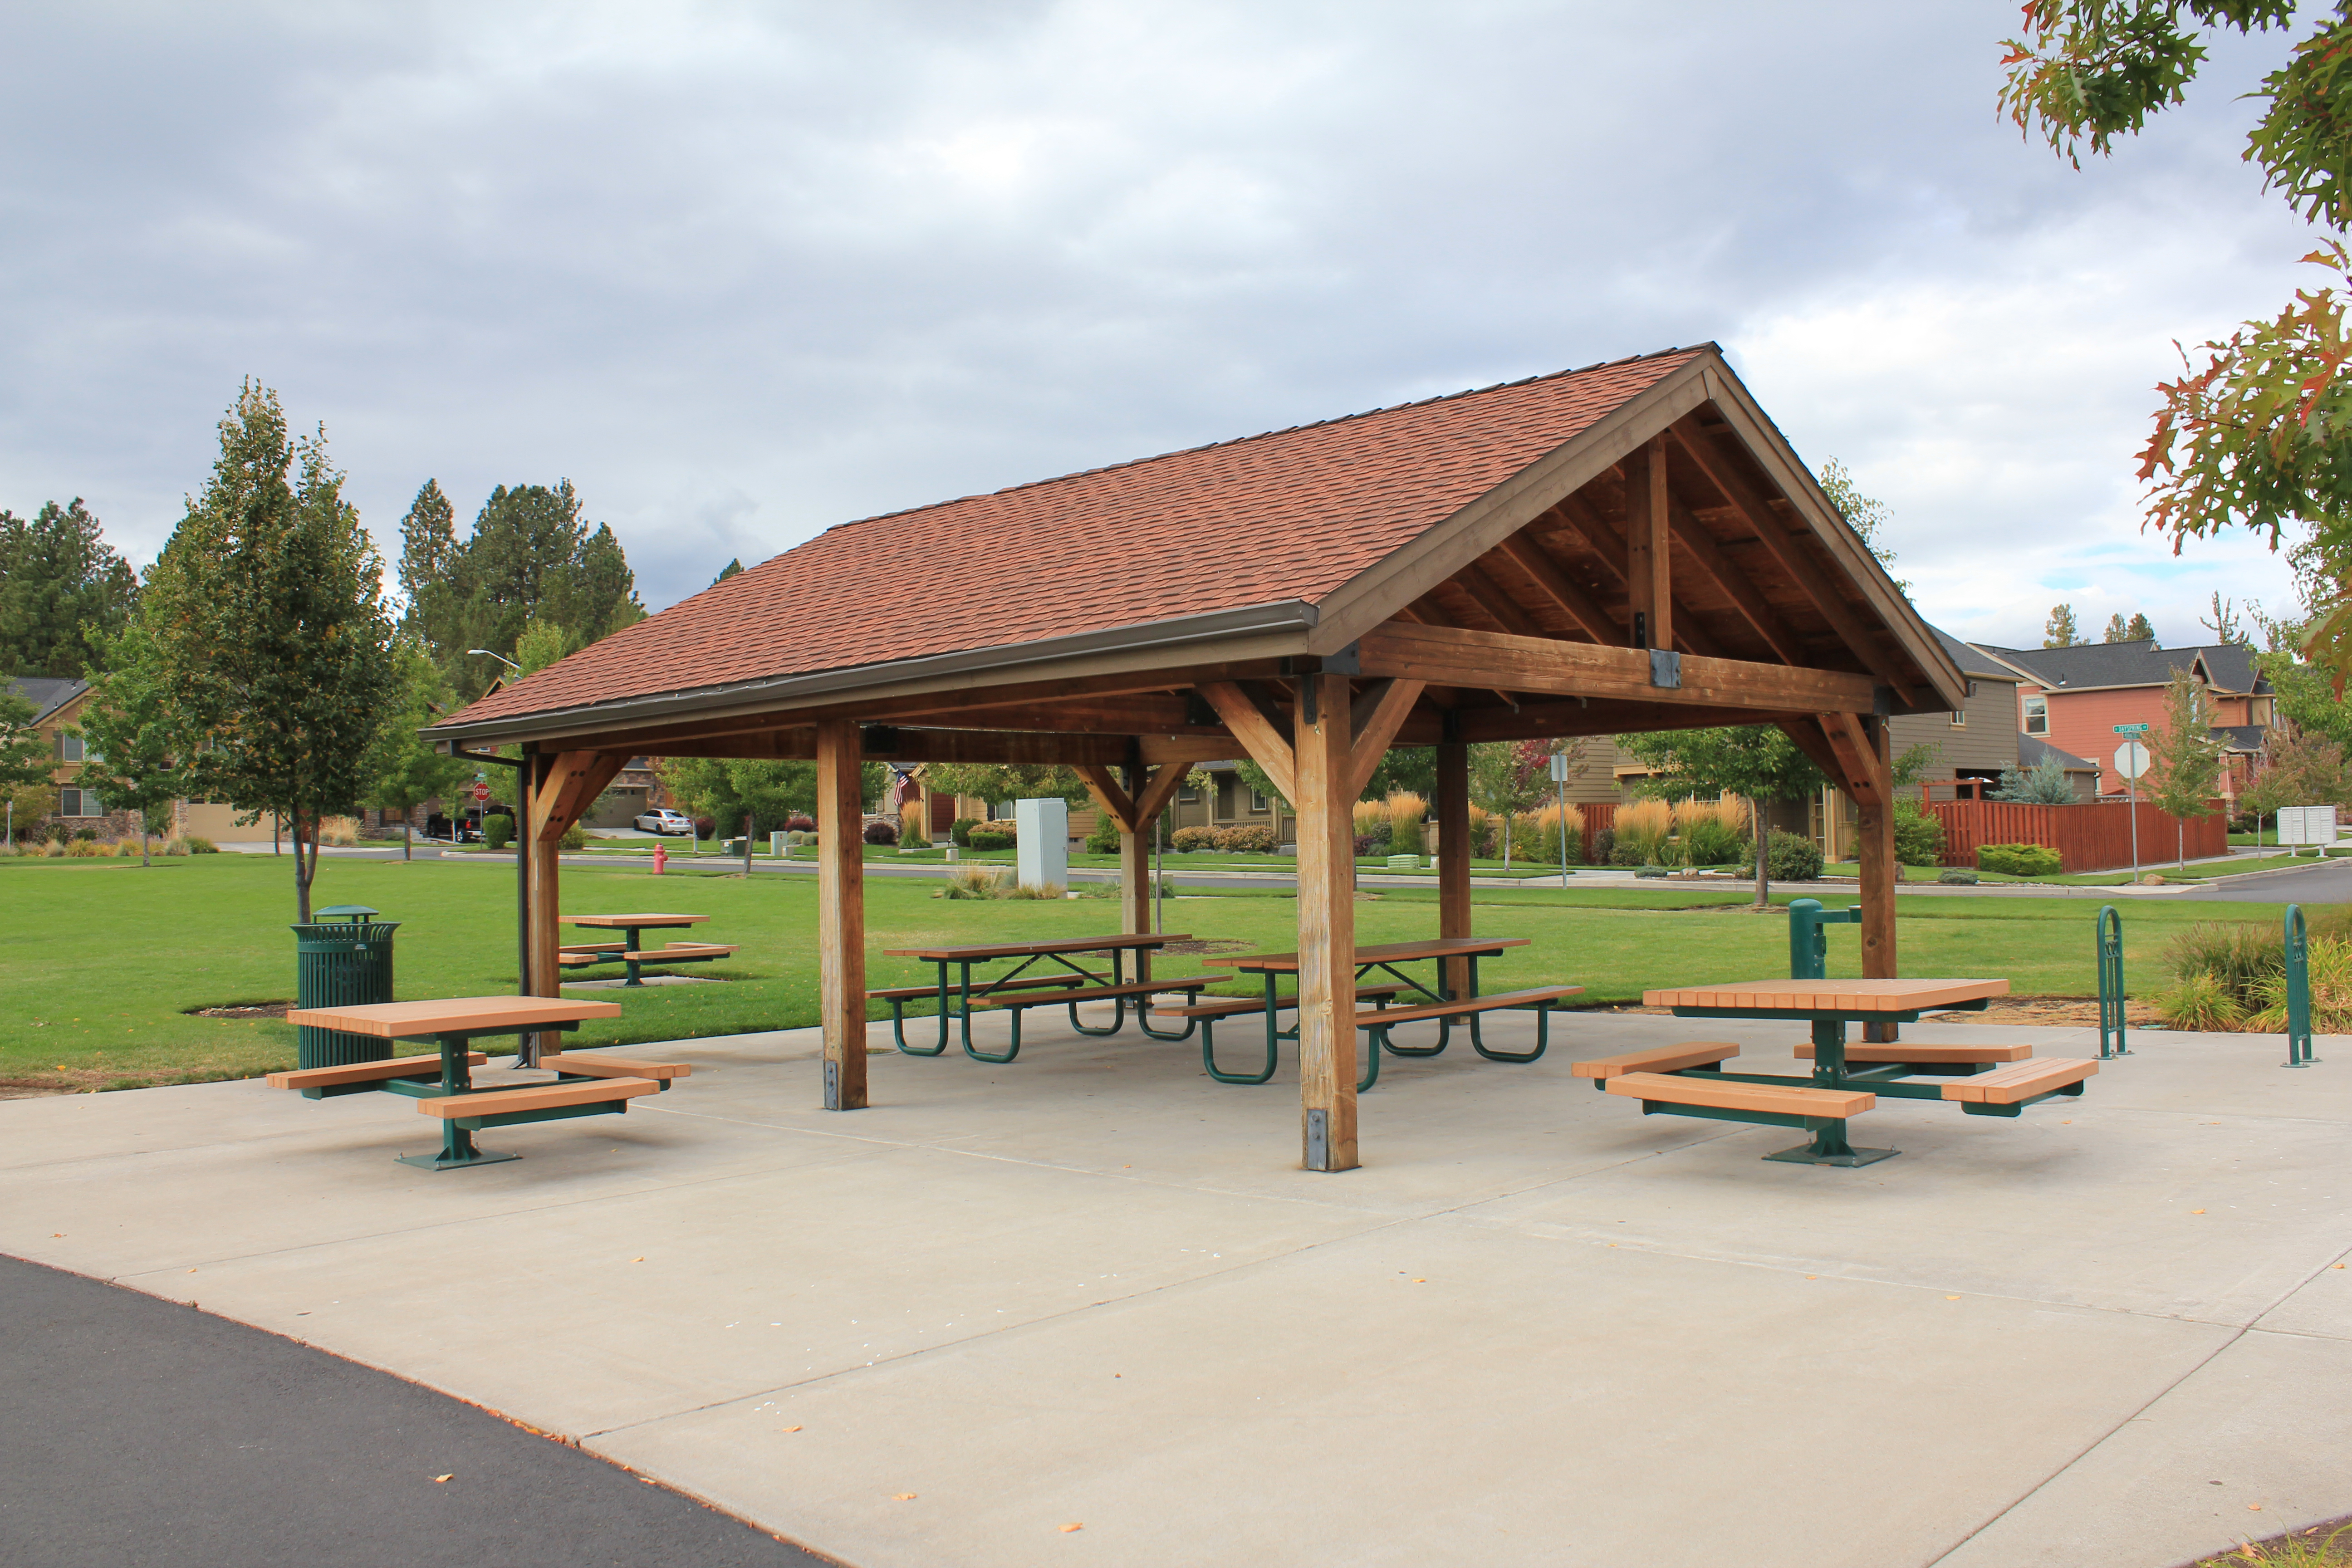 The shelter at Sun Meadow Park